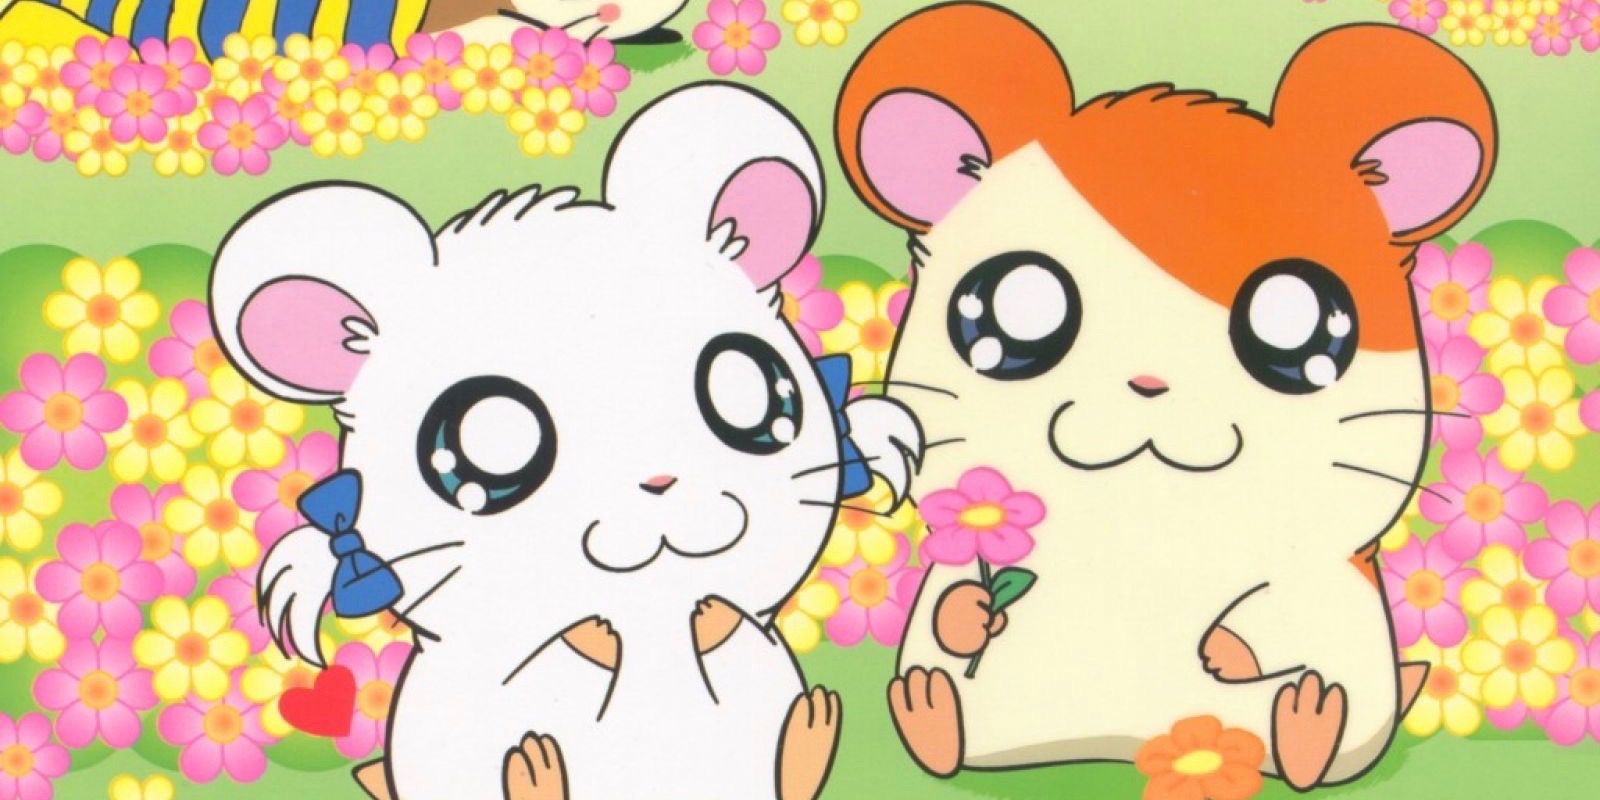 Hamtaro characters from the anime